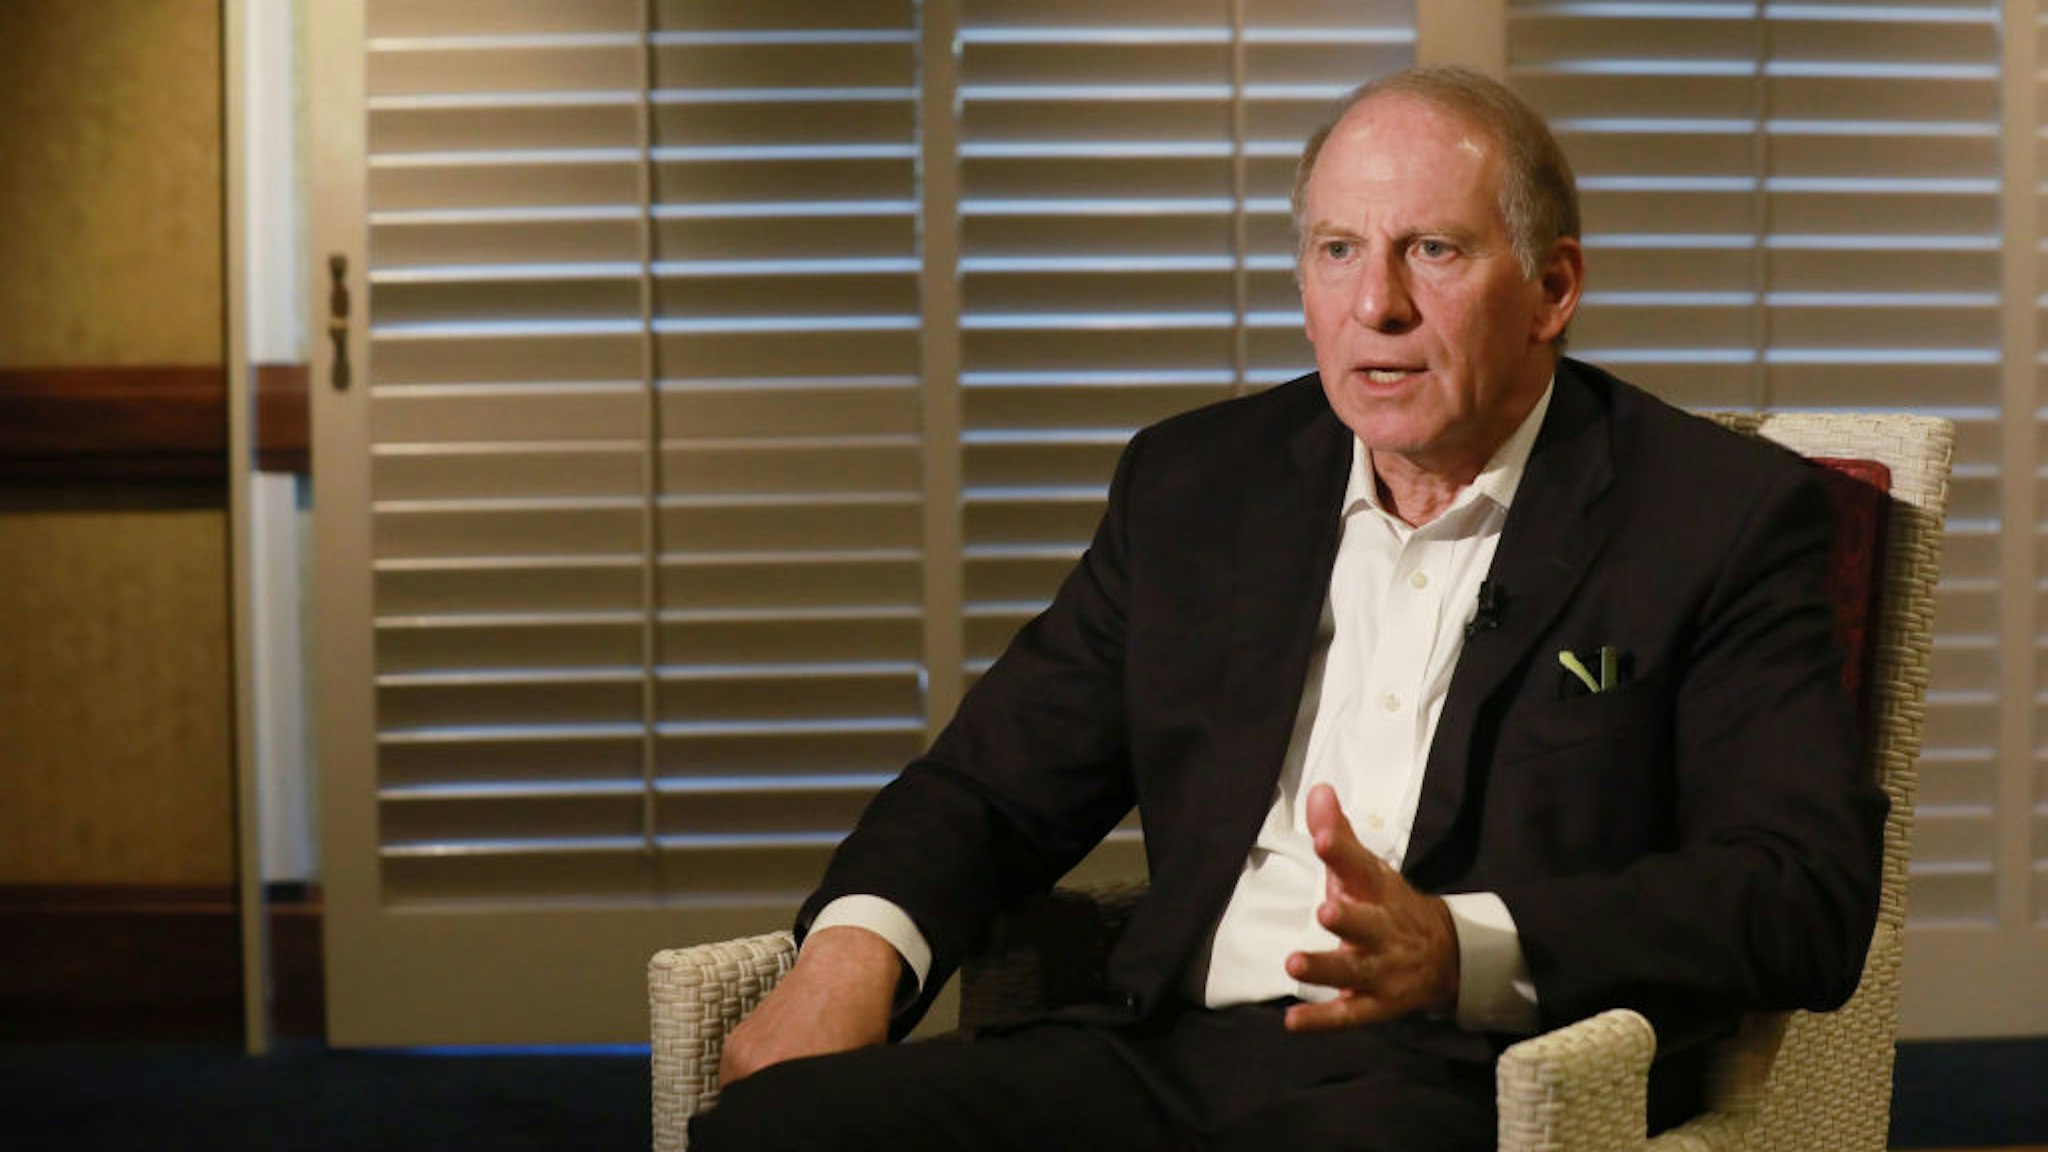 Richard Haass, president of the Council On Foreign Relations, speaks during an interview on the sidelines of the 80th annual Mexican Banking Association in Acapulco, Mexico, on Thursday, March 23, 2017.